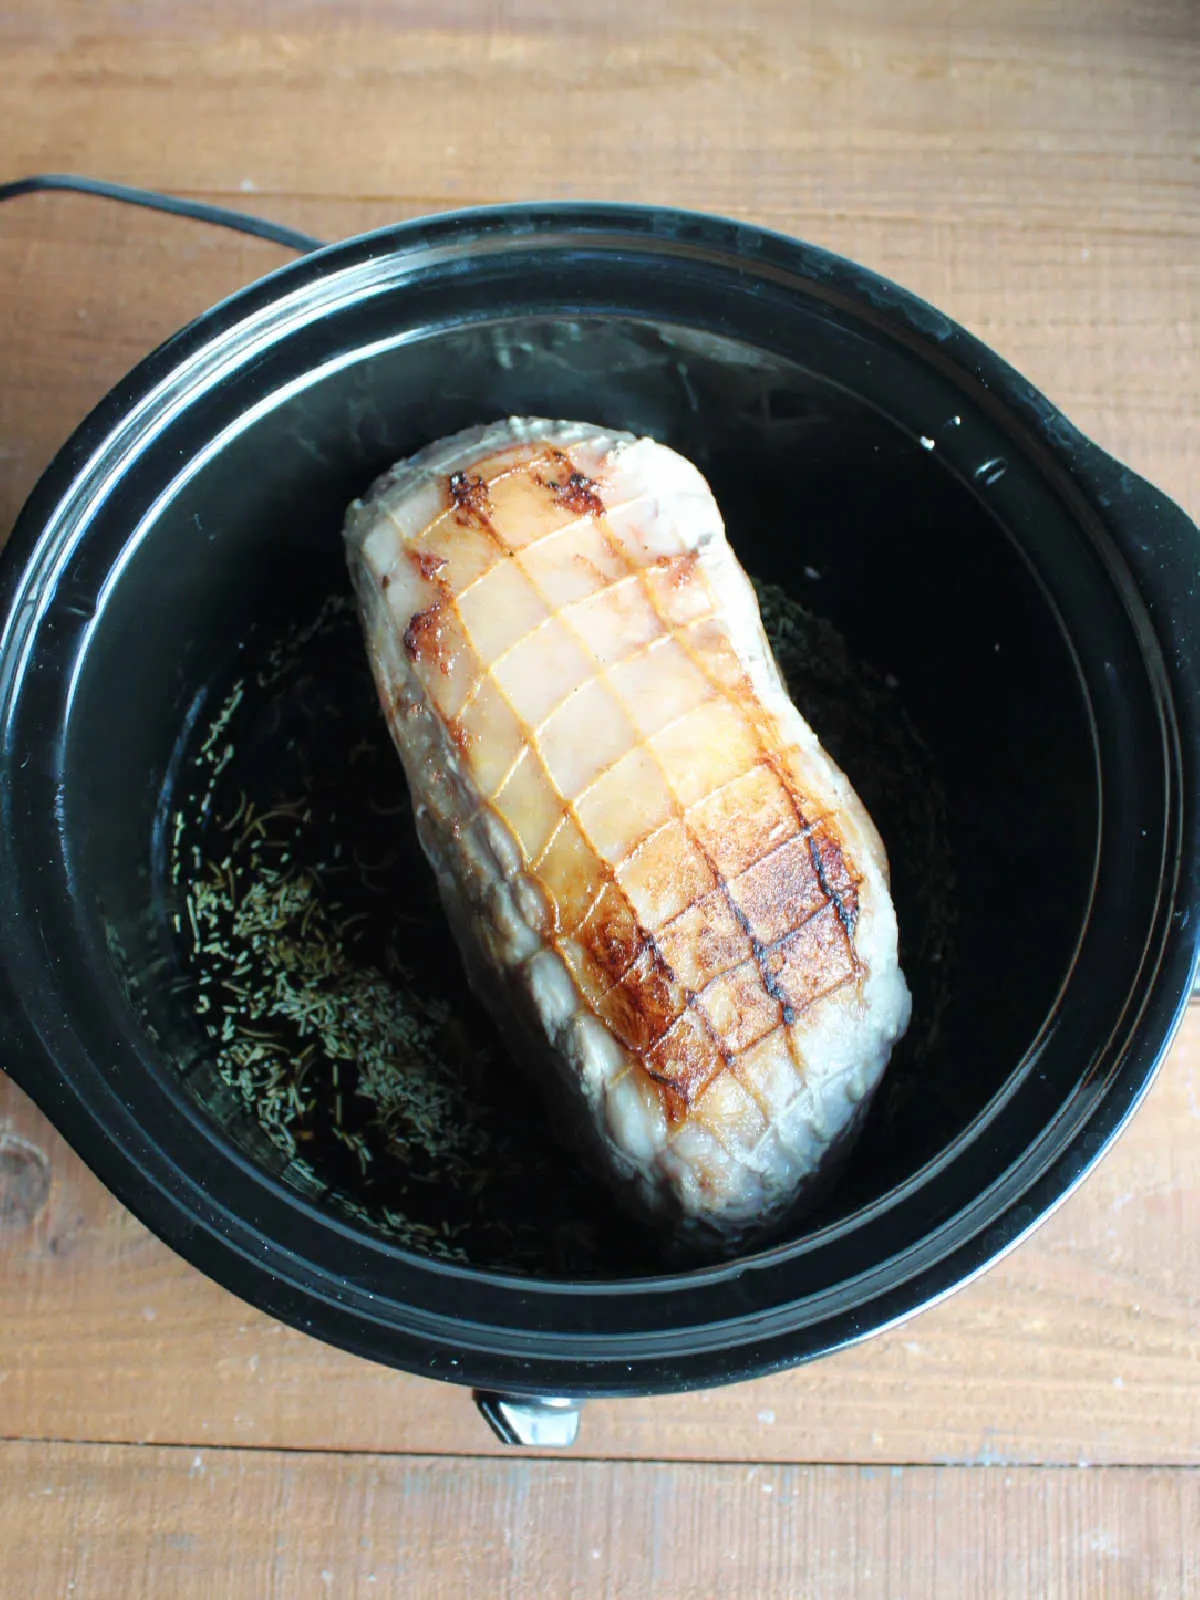 Browned pork shoulder roast in crockpot with balsamic vinegar, honey, and herb mixture ready to cook.